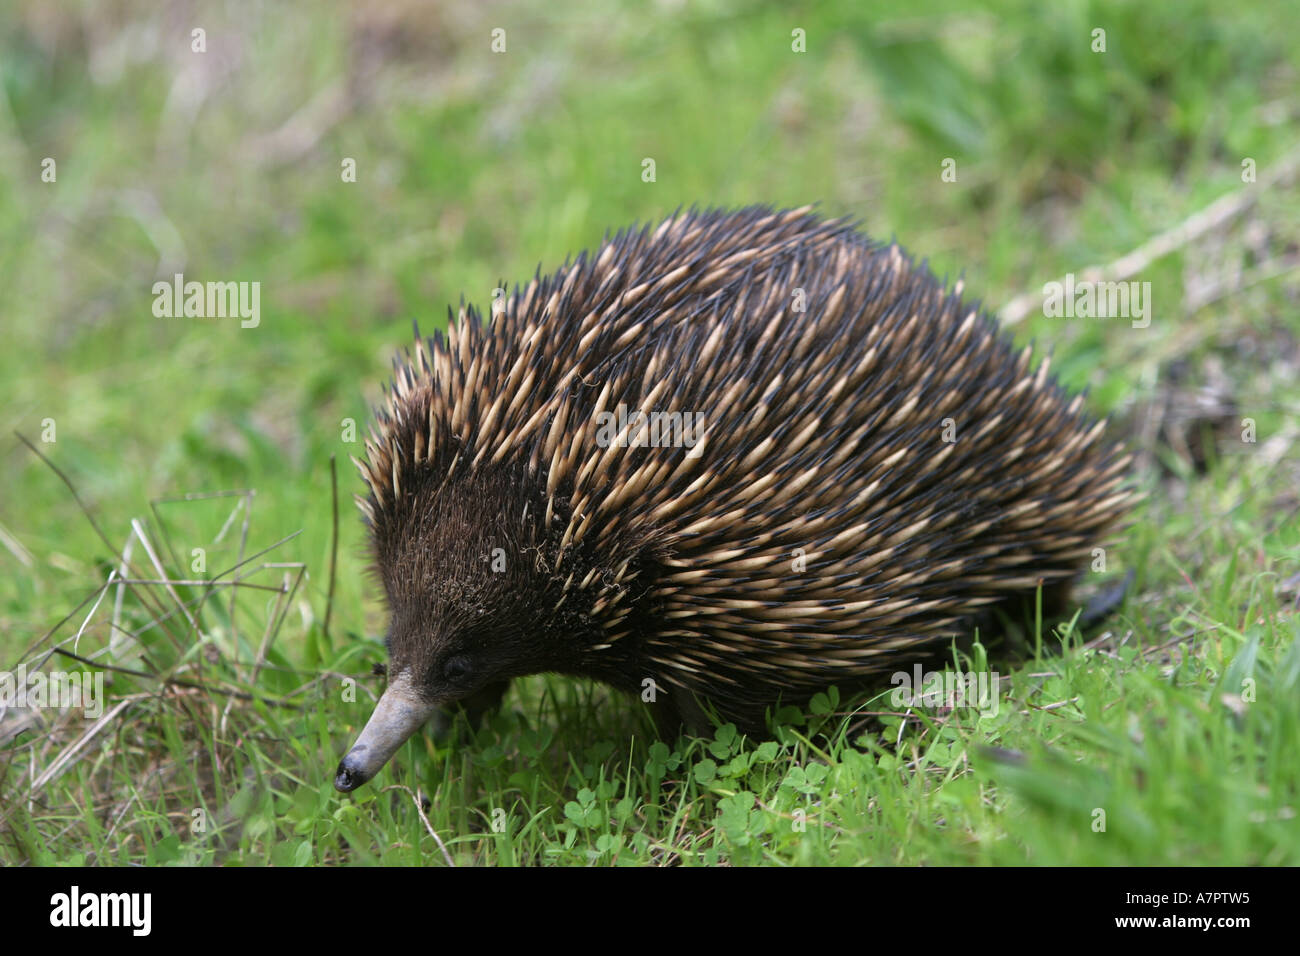 short-nosed echidna, short-beaked echidna, spiny anteater (Tachyglossus aculeatus), lateral, Australia, Victoria Stock Photo